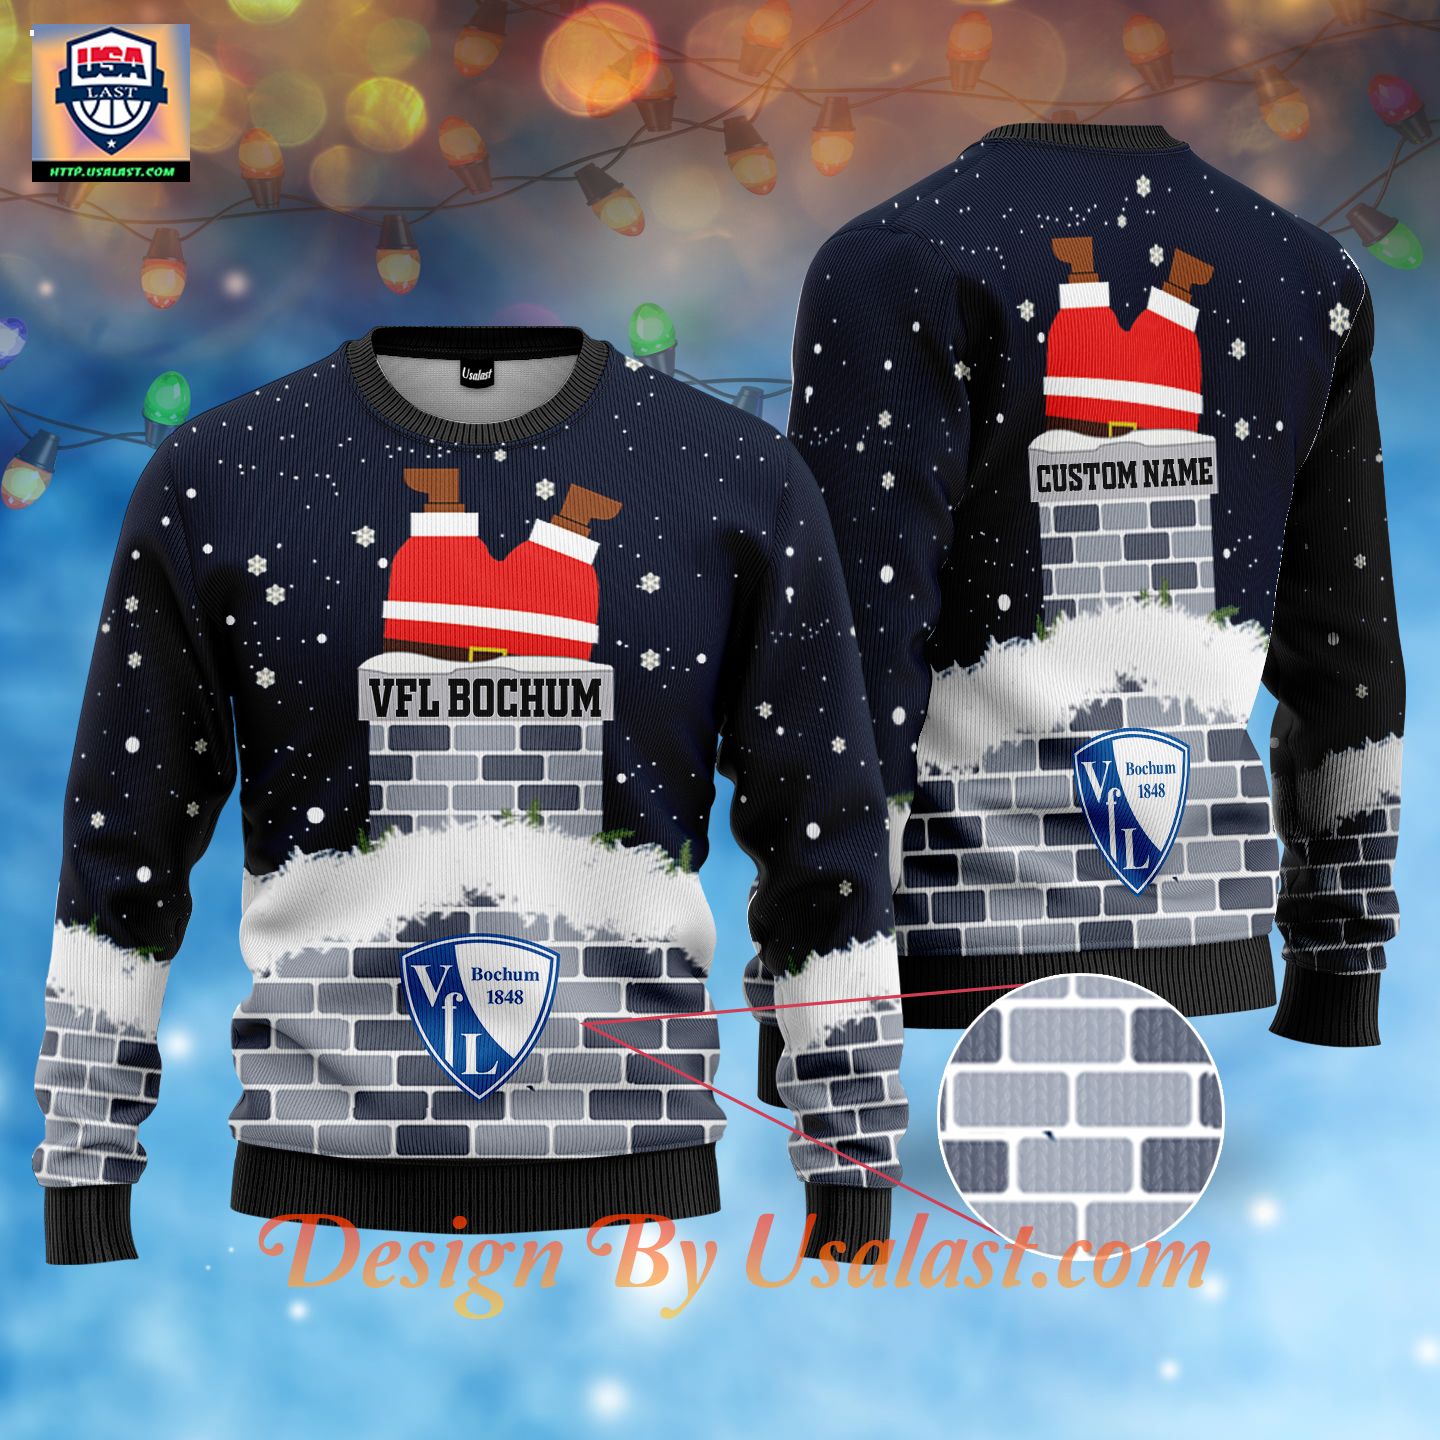 Welcome VfL Bochum Custom Name Ugly Christmas Sweater – Navy Version